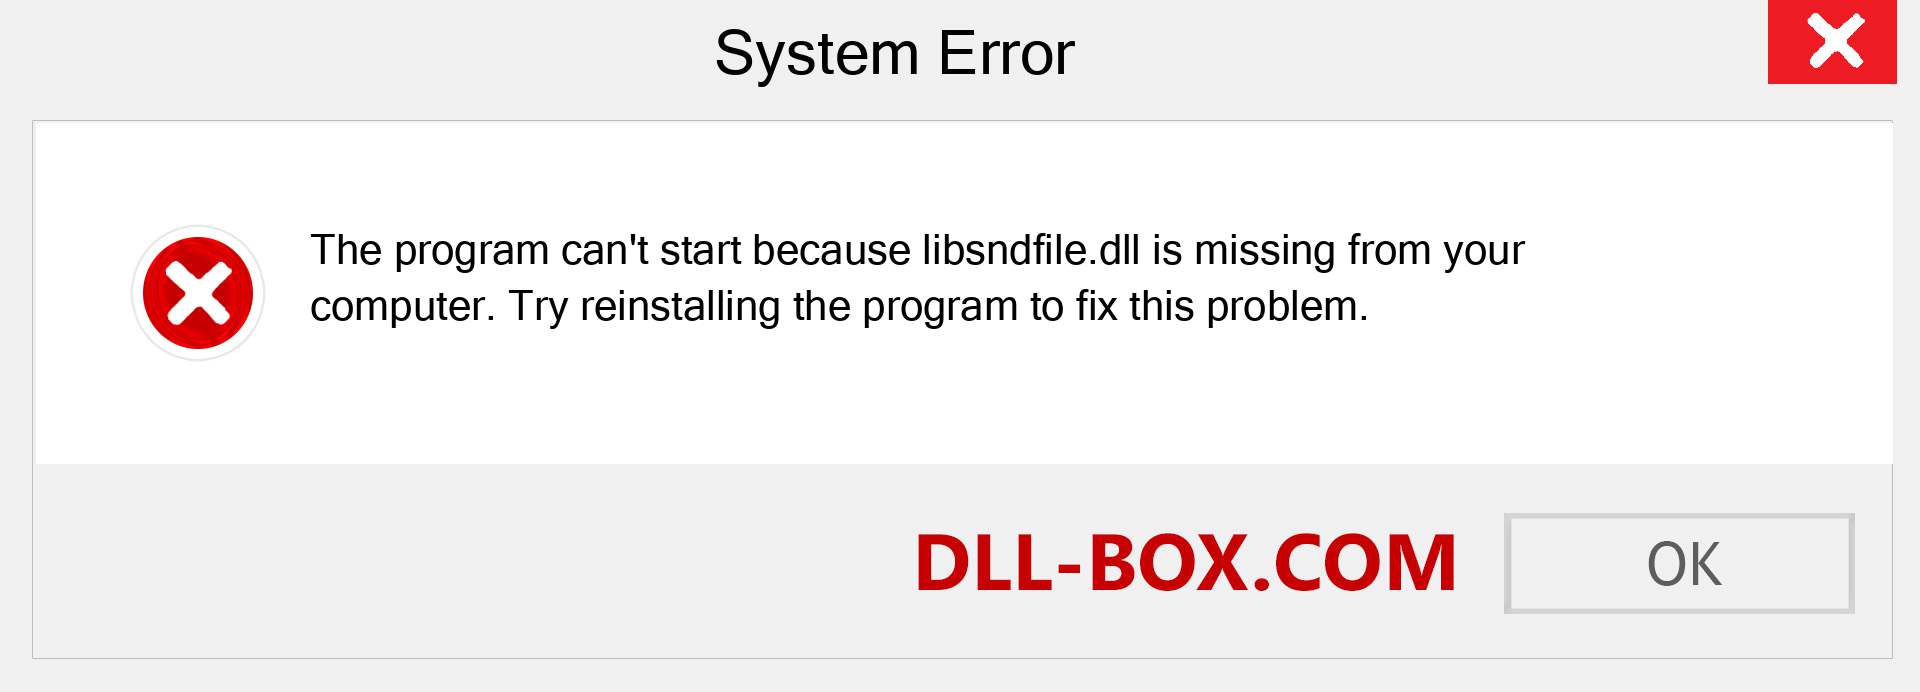  libsndfile.dll file is missing?. Download for Windows 7, 8, 10 - Fix  libsndfile dll Missing Error on Windows, photos, images